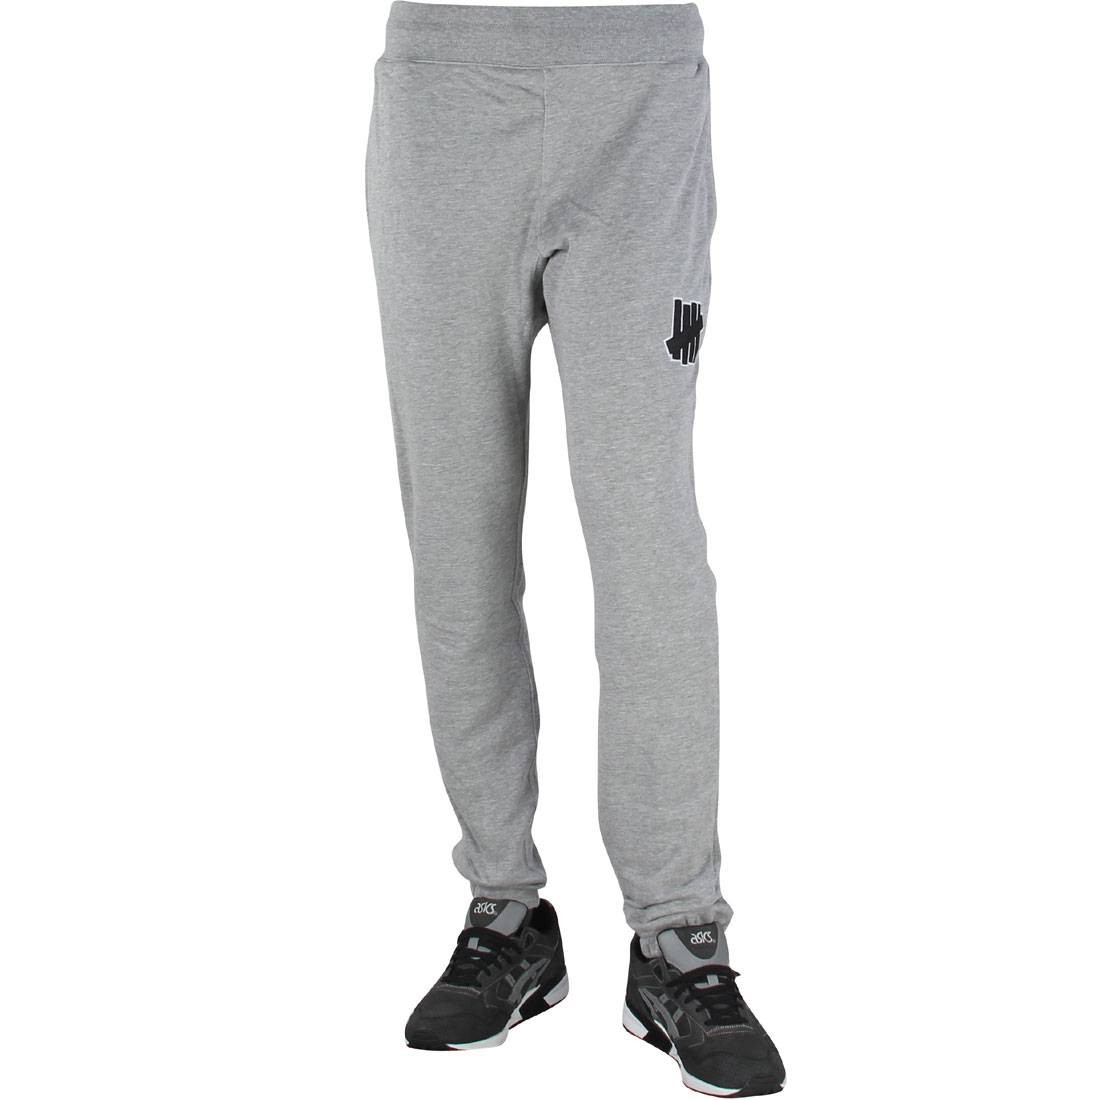 Undefeated Men 5 Strike Spring 2016 Sweatpants gray heather